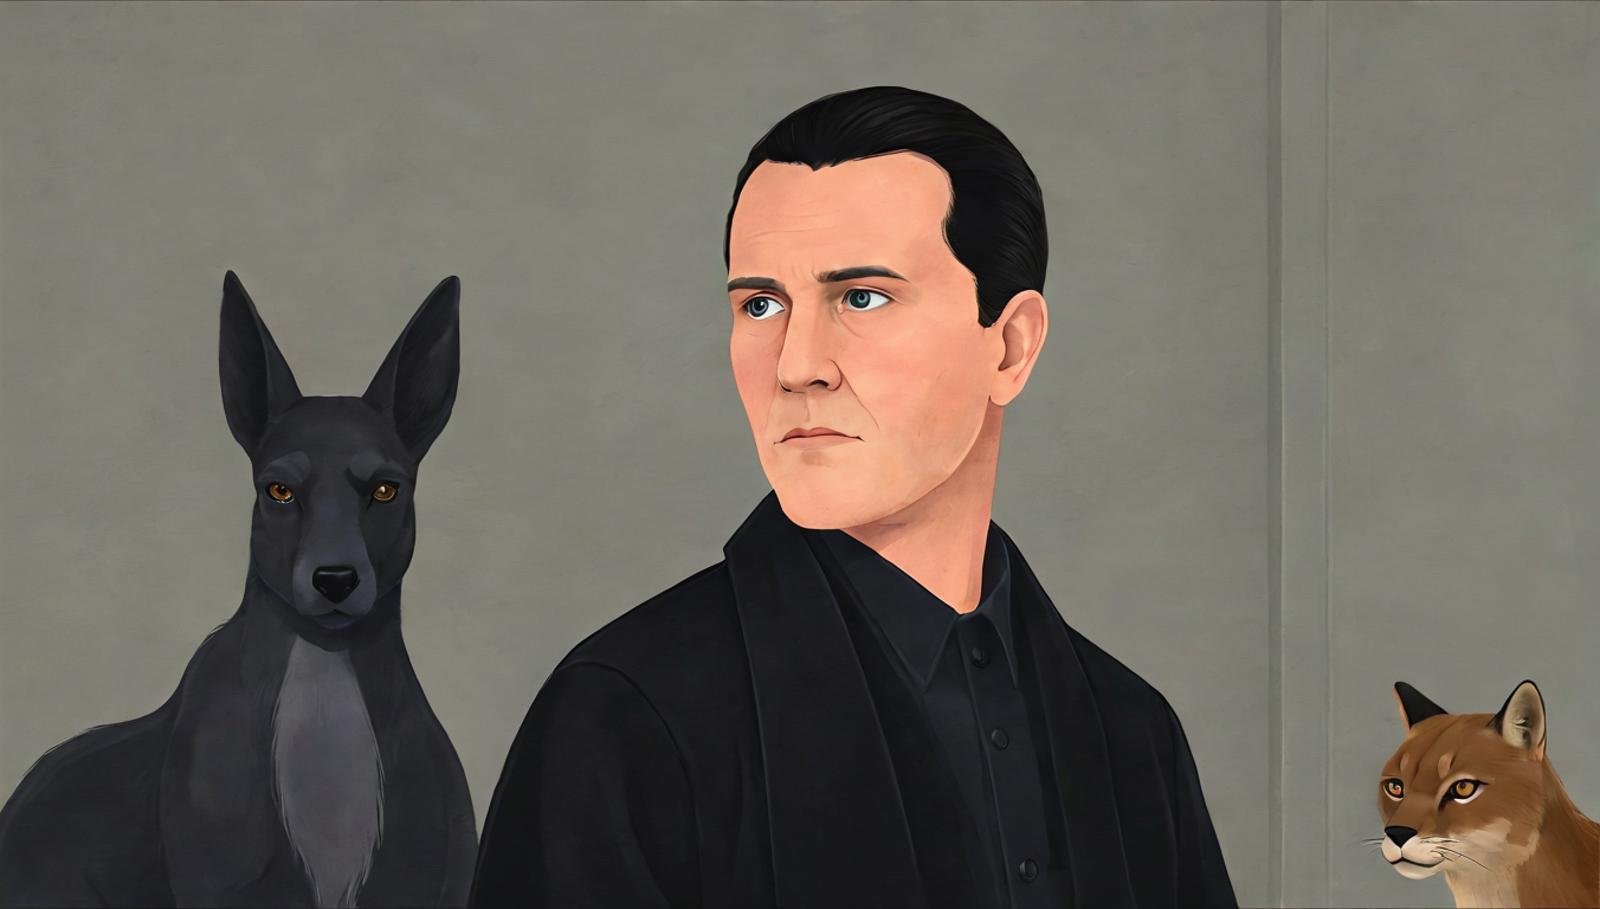 minimalistic modern illustration closeup of Dmitri with a stern expression and slicked-back black hair, wearing a black overcoat, surrounded by ominous shadows and taxidermy animals, with a dark, moody background<lora:EMS-401350-EMS:1.000000>